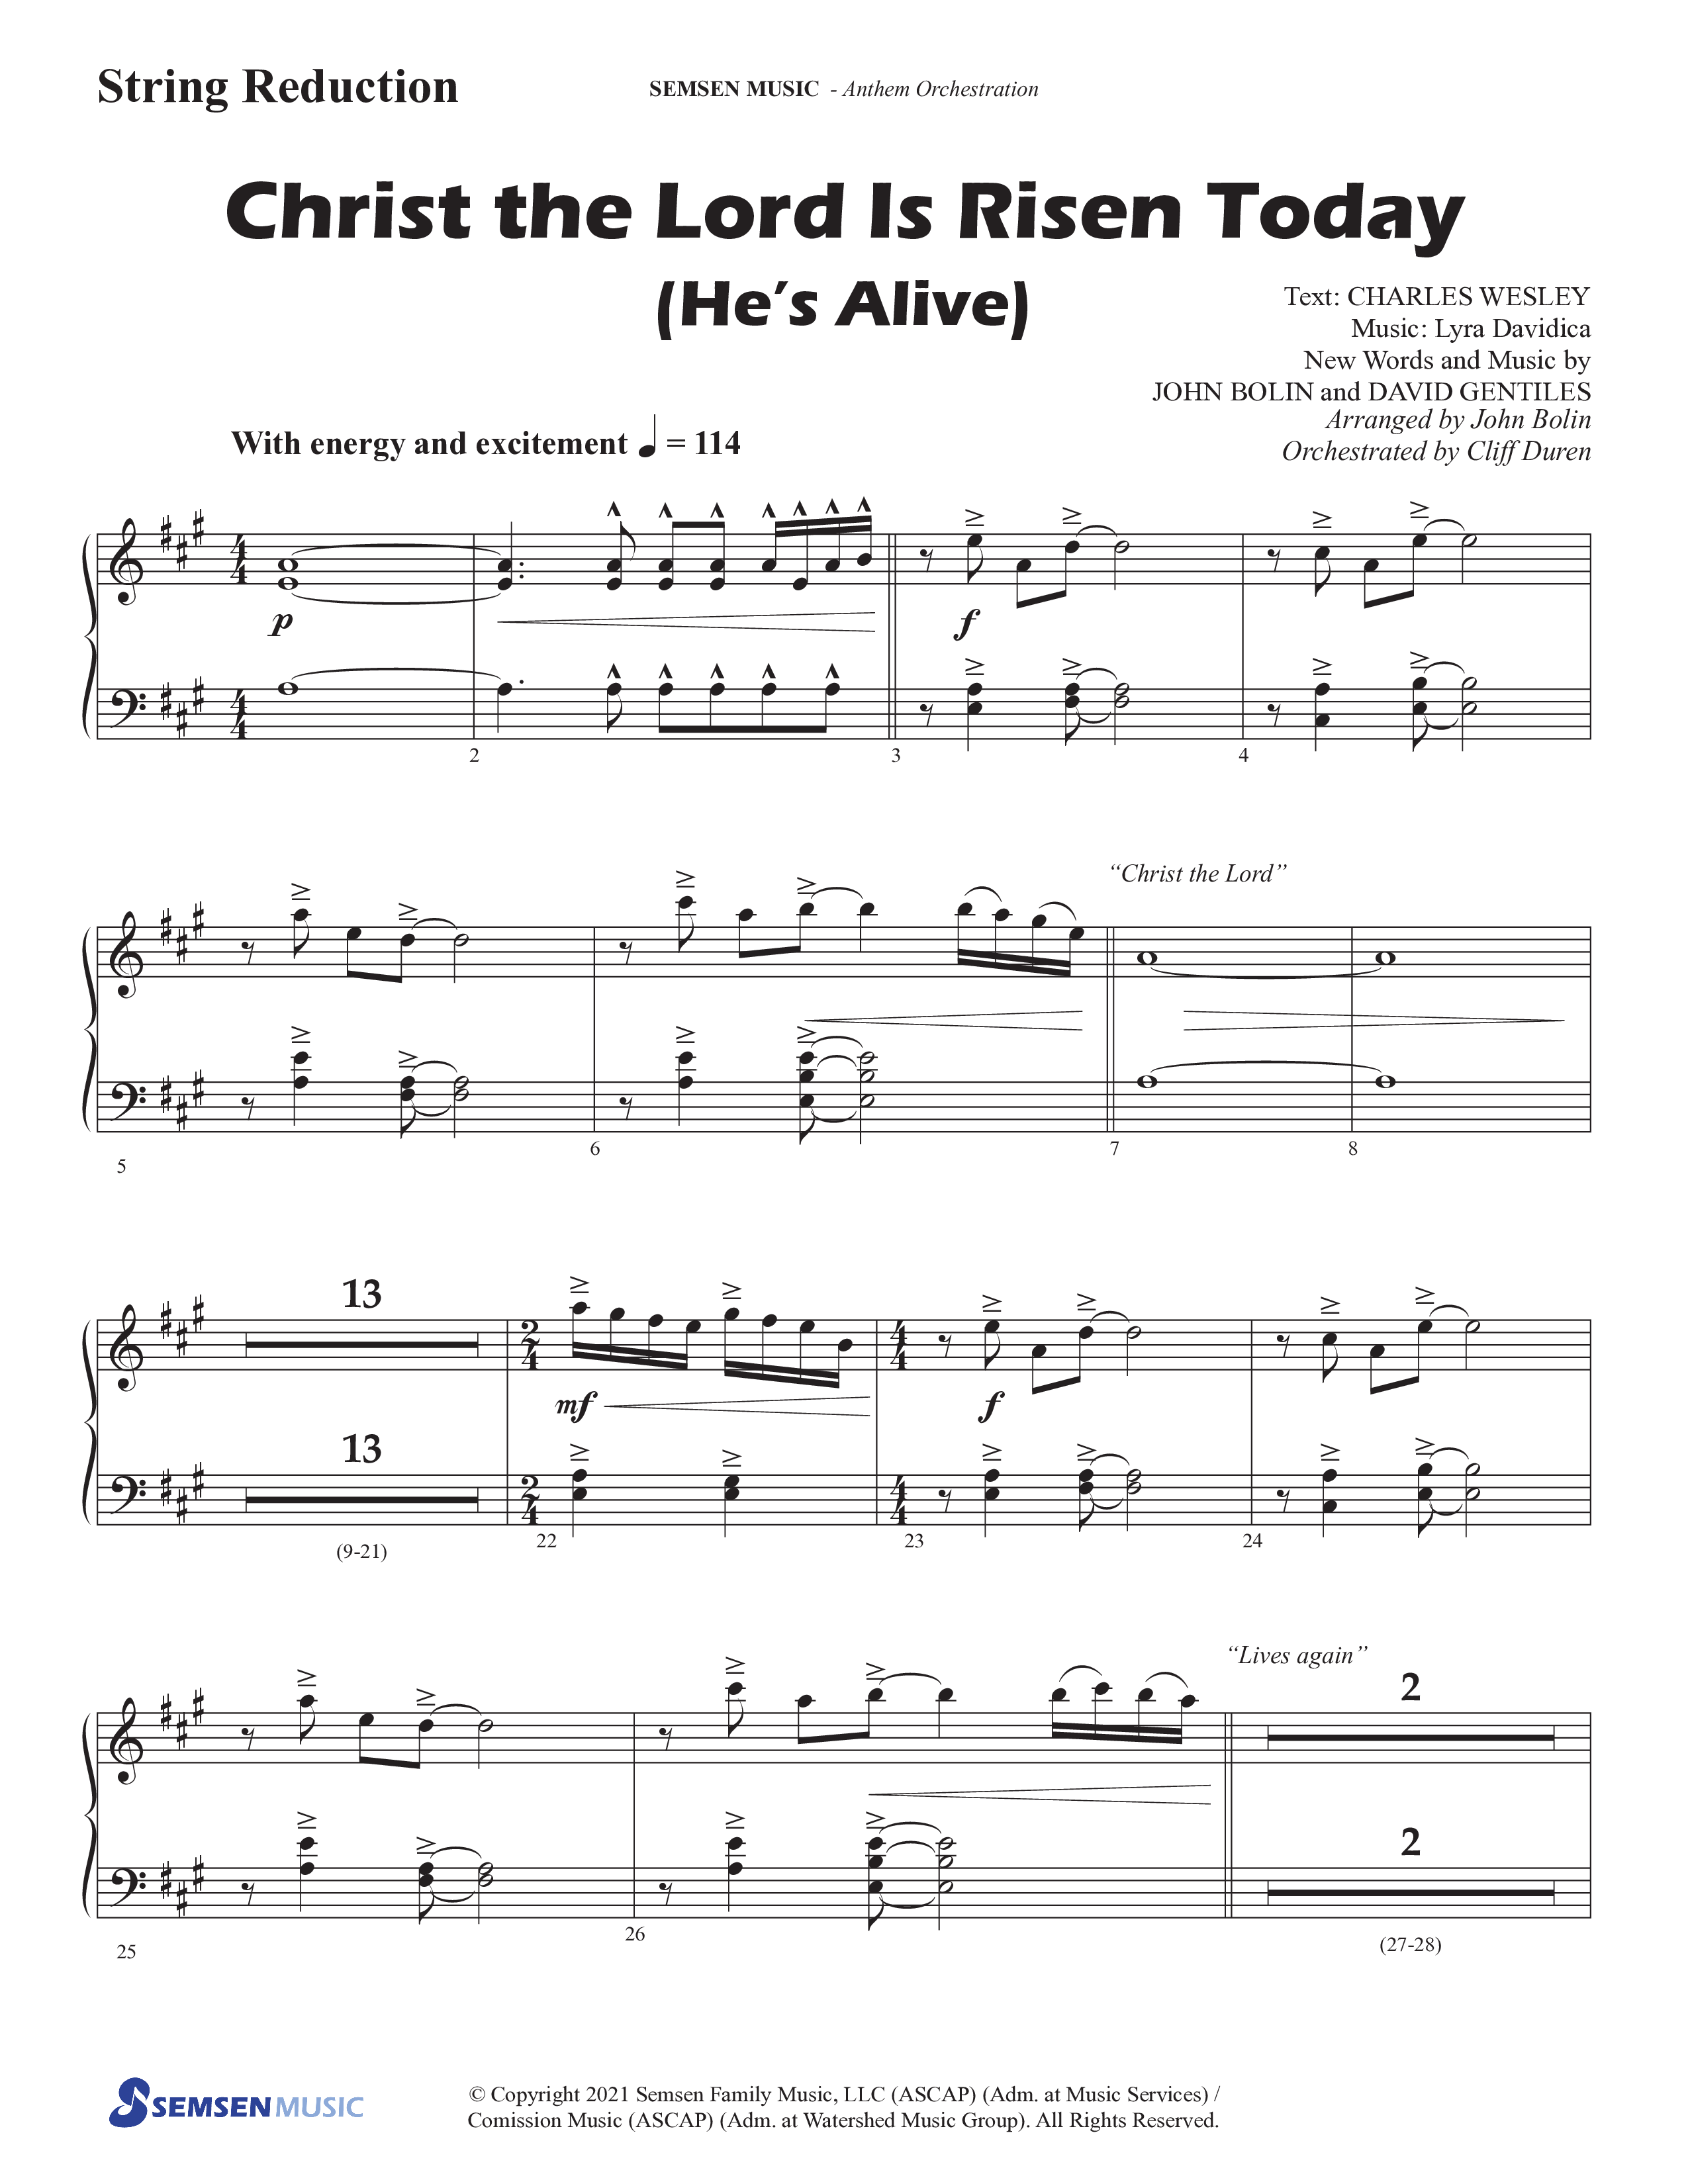 Christ The Lord Is Risen Today (He's Alive) (Choral Anthem SATB) String Reduction (Semsen Music / Arr. John Bolin / Orch. Cliff Duren)